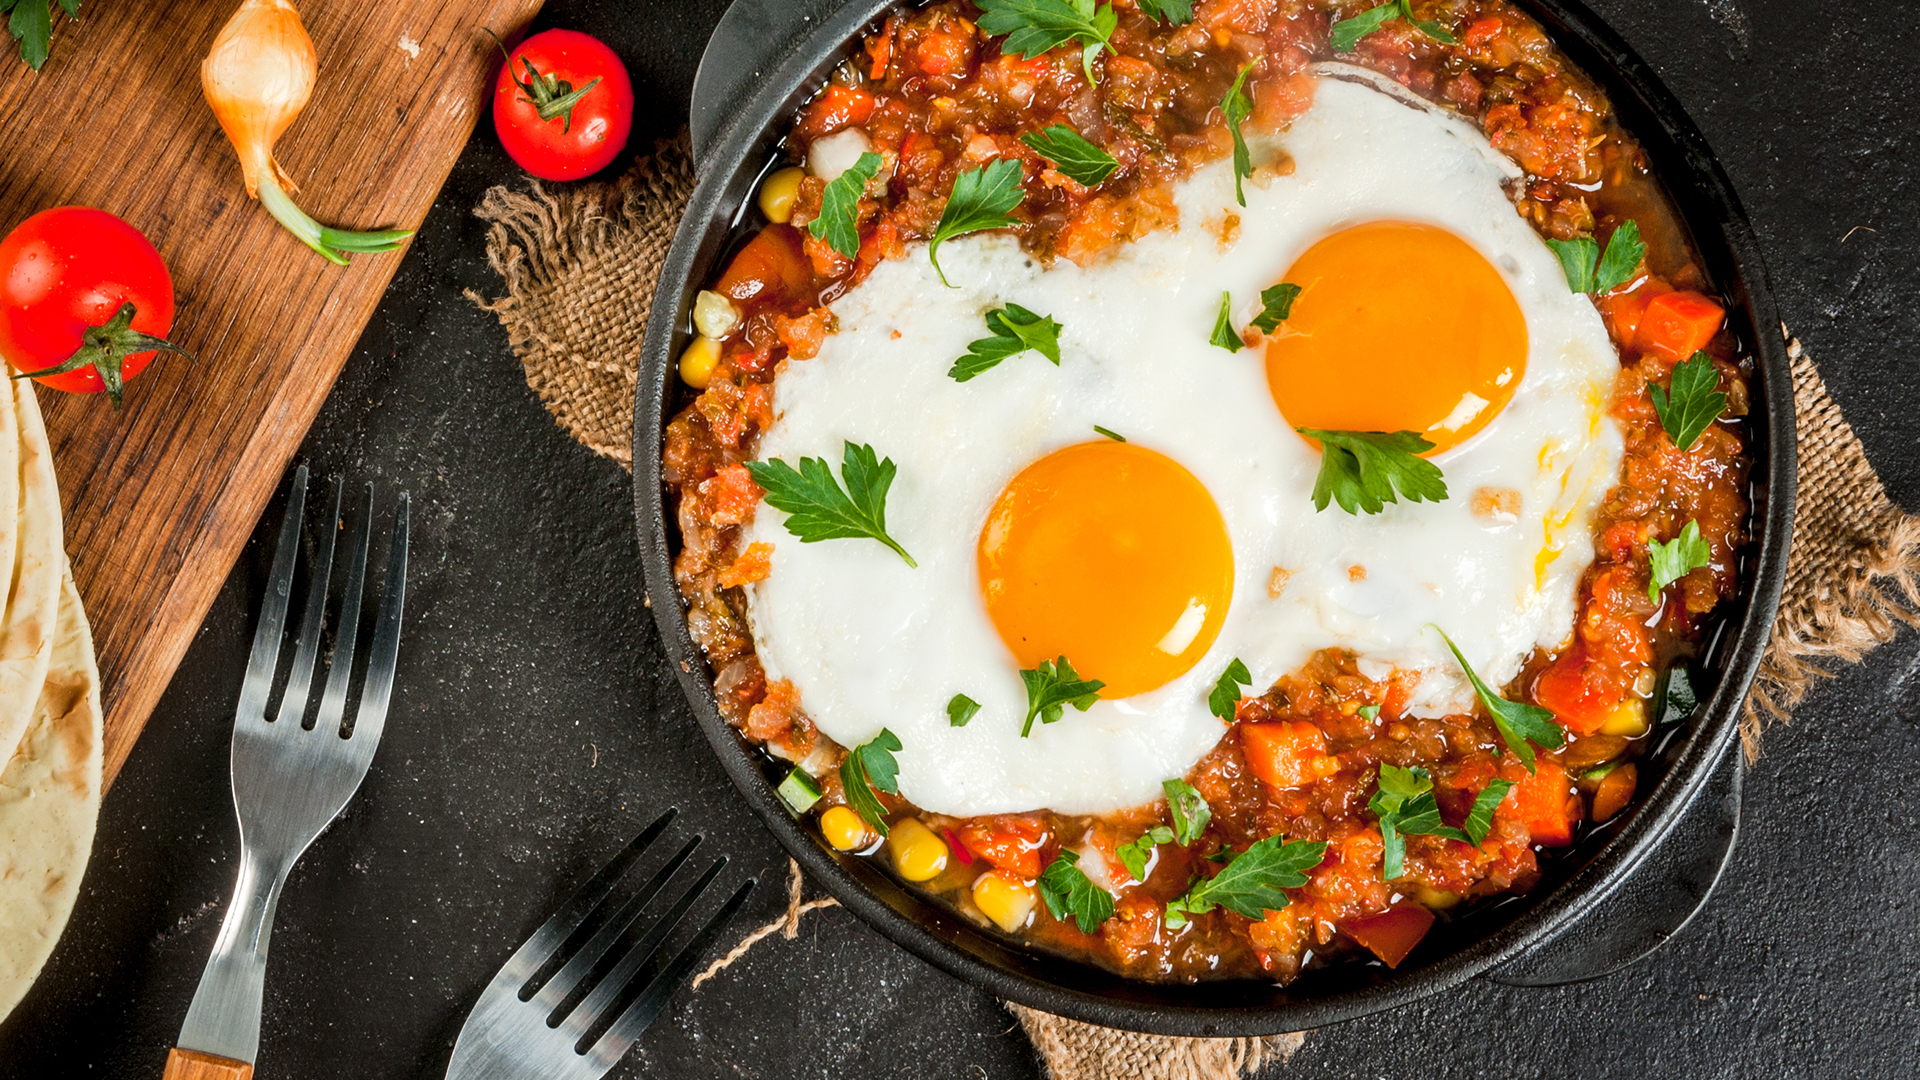 Chilli beans with eggs is vegetarian and gluten-free breakfast feast